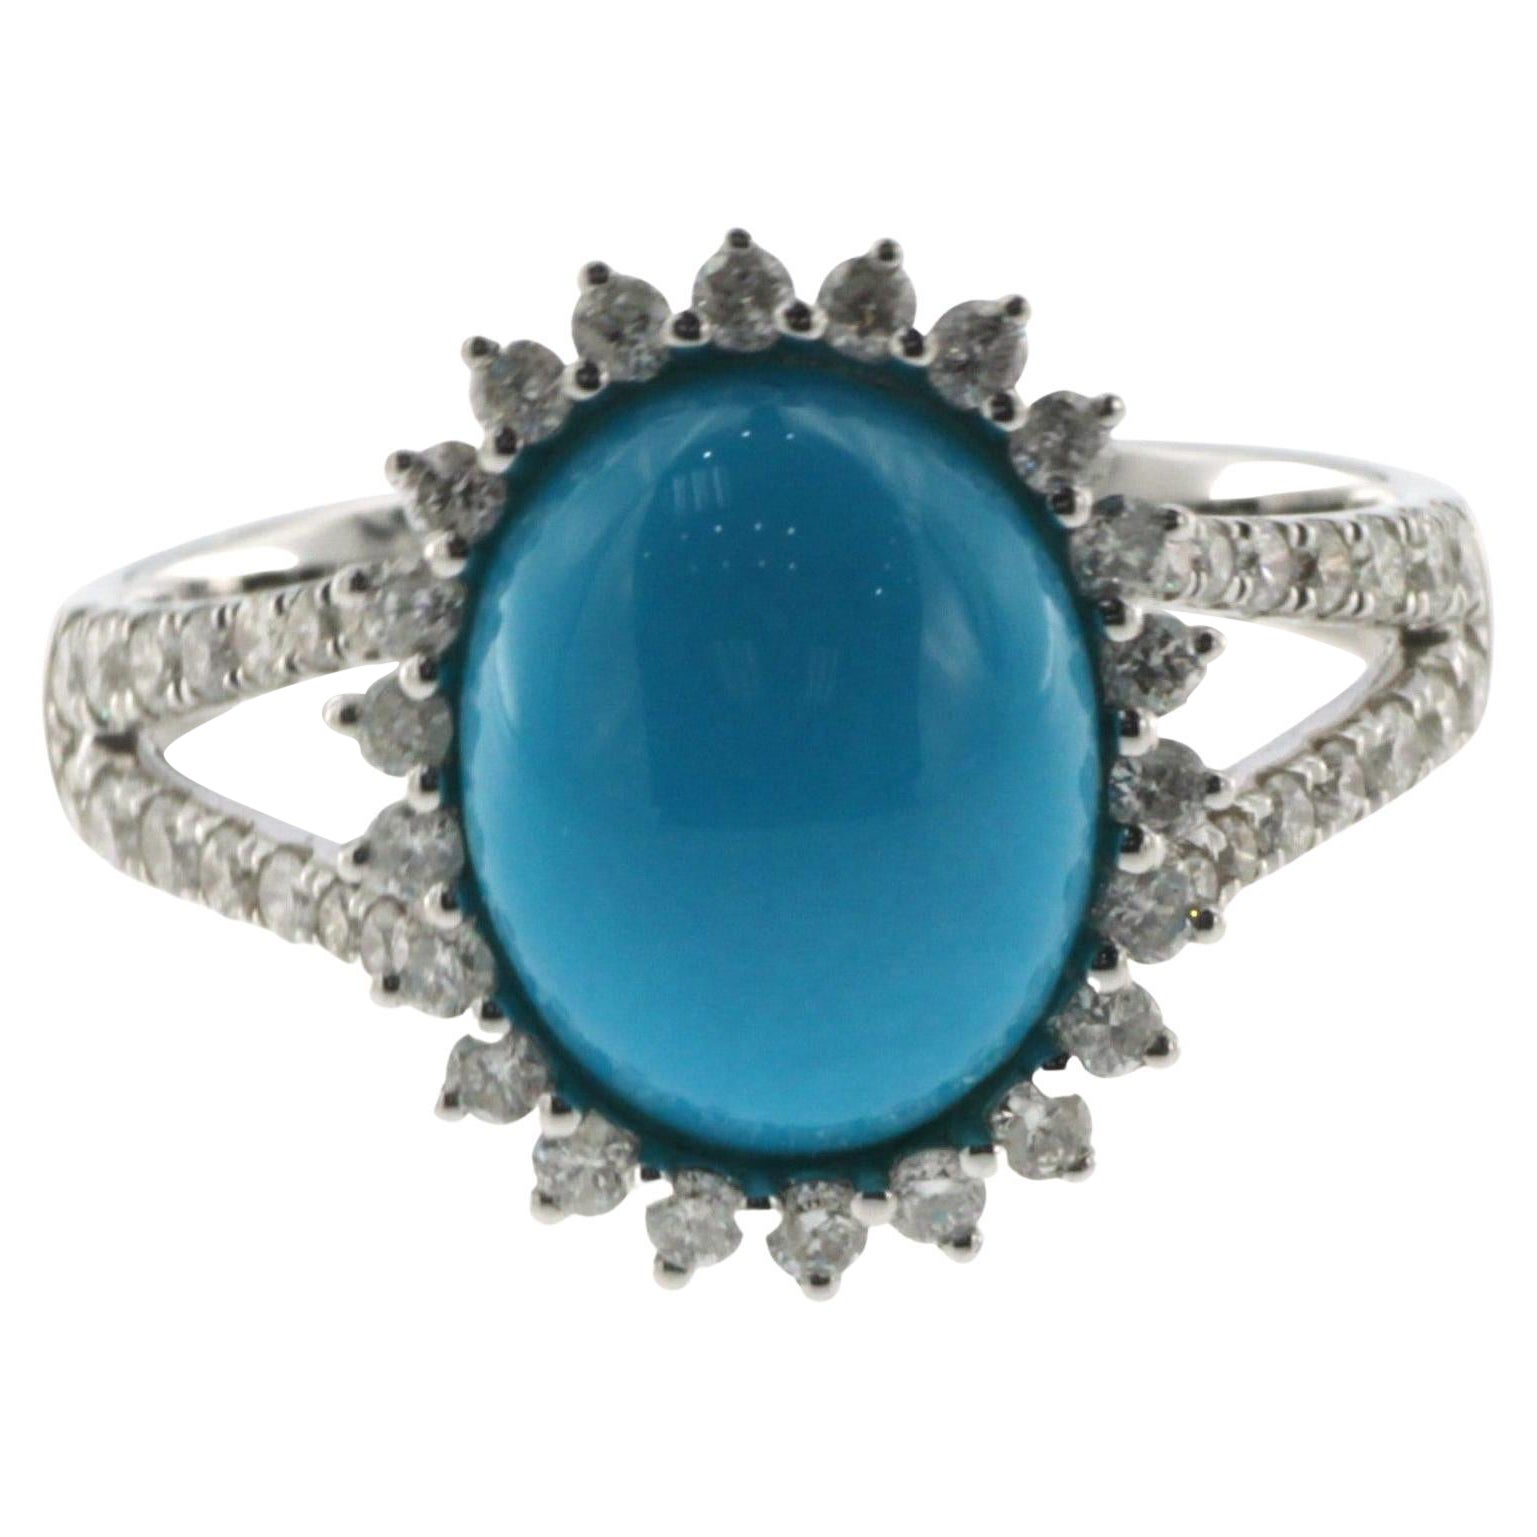 Presenting our exquisite Sleeping Beauty Turquoise Ring, a true gem of elegance and beauty. This captivating piece showcases a stunning 2.65 carat oval cabochon turquoise sourced from the renowned Sleeping Beauty Mine. Known for its pure, light blue